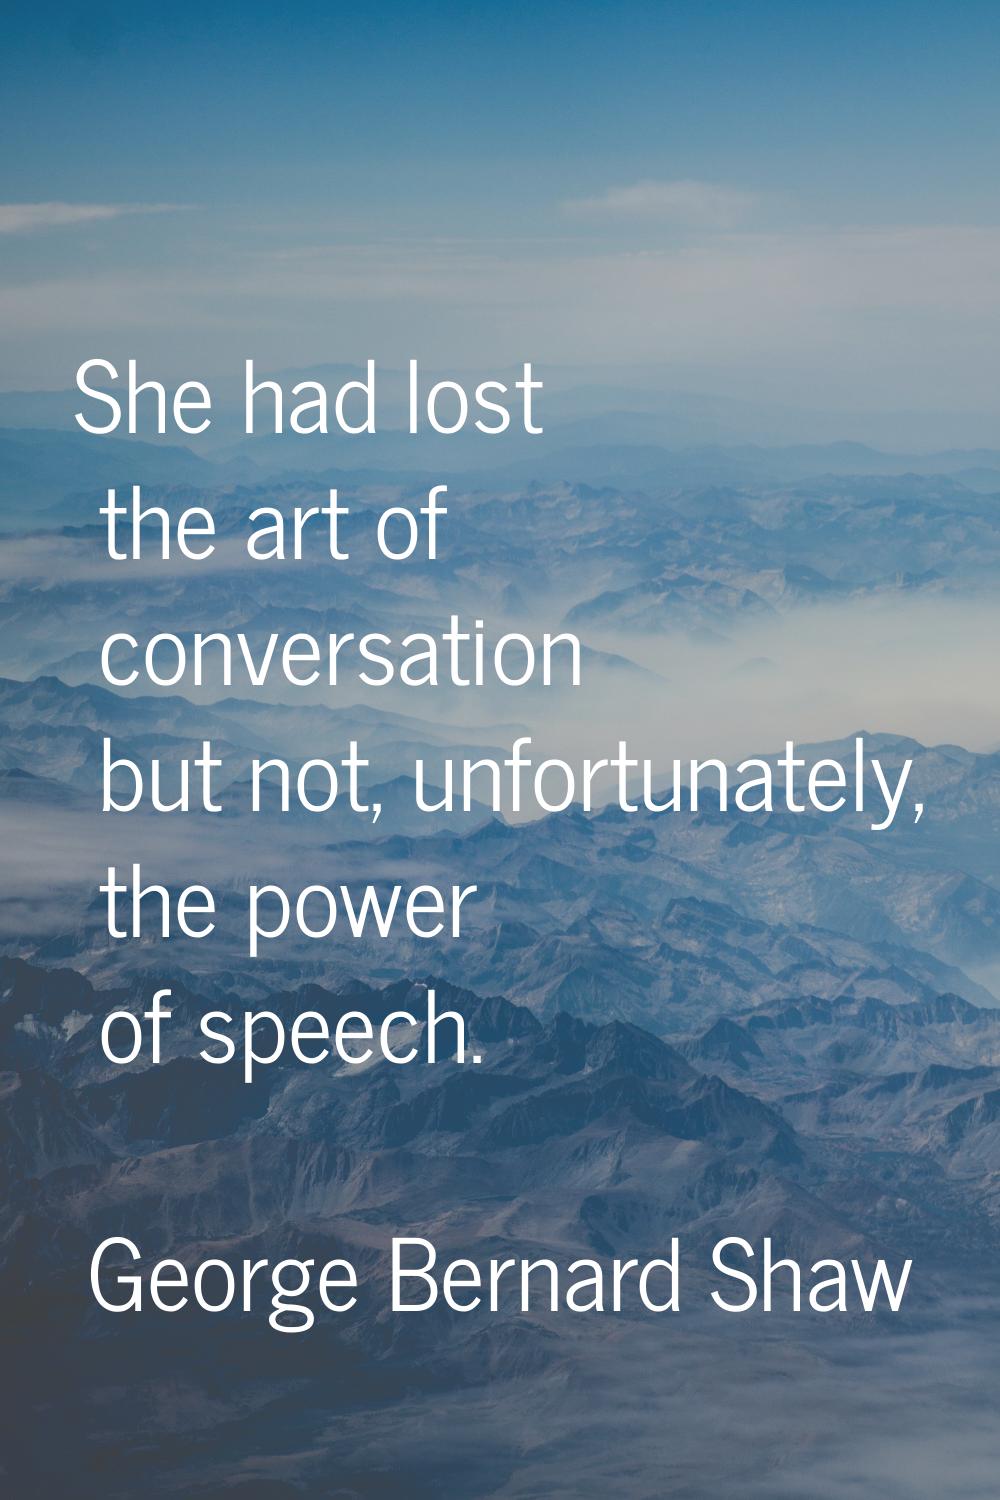 She had lost the art of conversation but not, unfortunately, the power of speech.